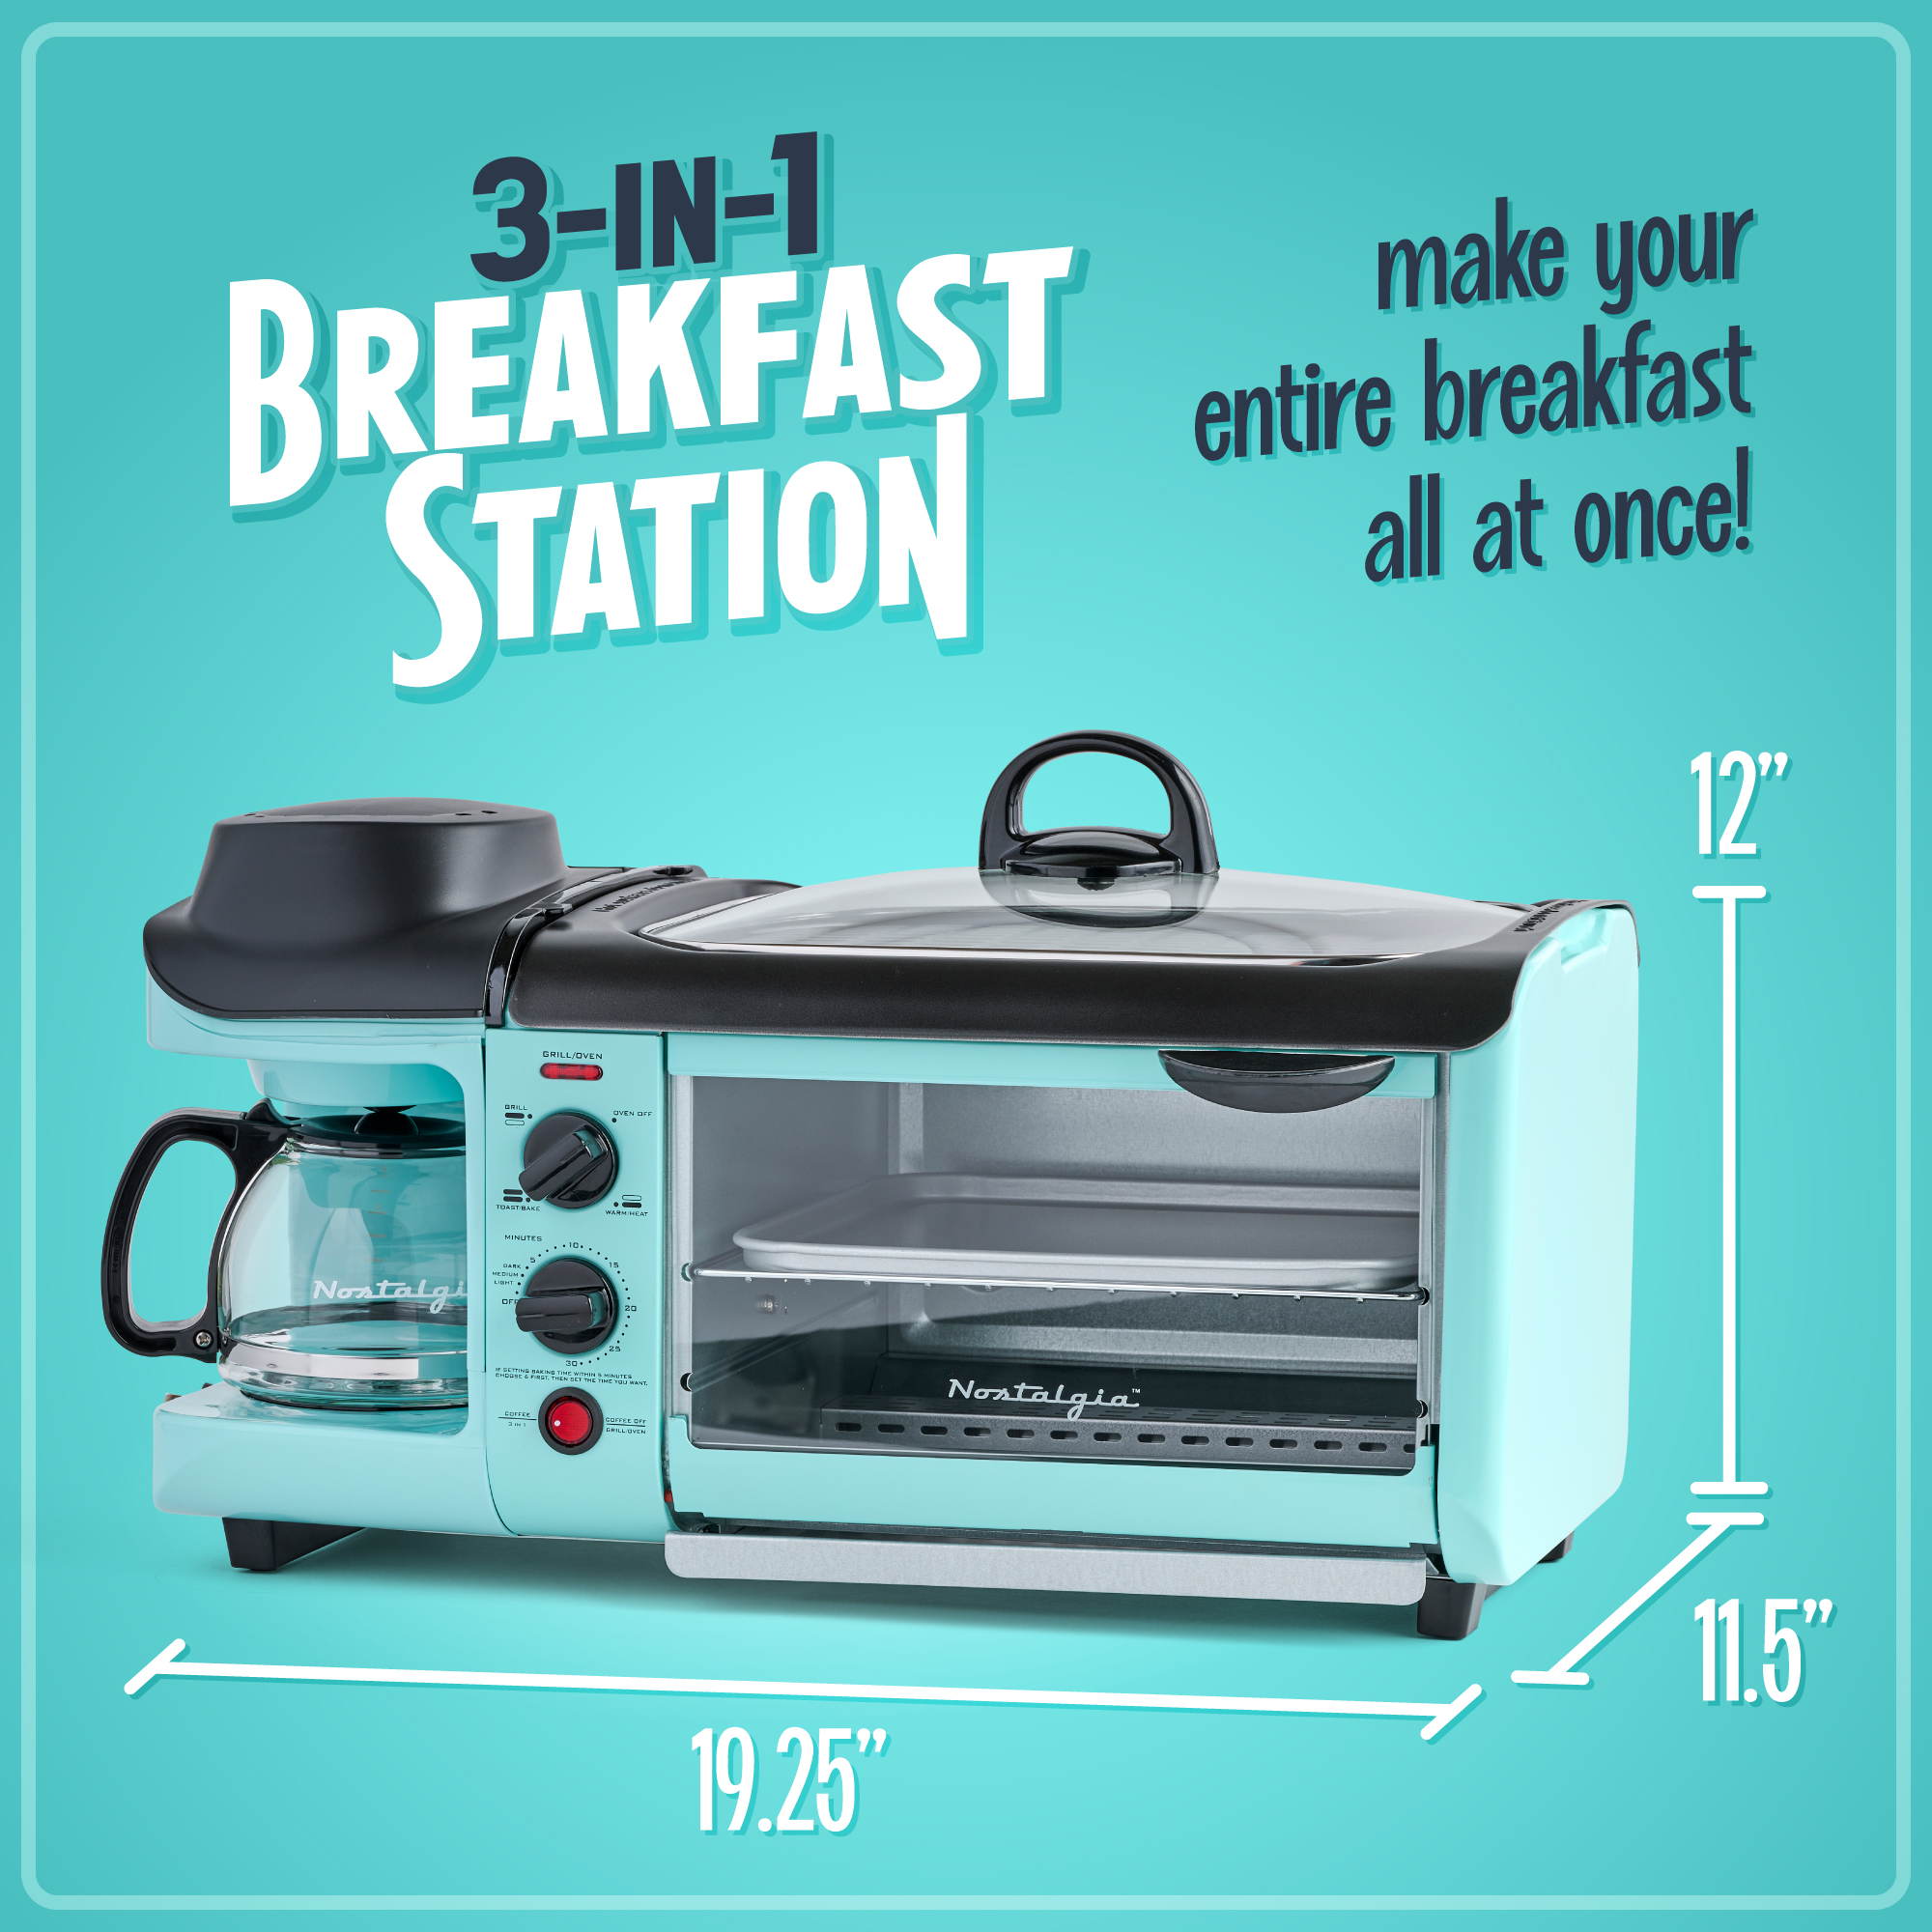 Nostalgia BST3AQ Retro 3-in-1 Family Size Electric Breakfast Station, Coffeemaker, Griddle, Toaster Oven - Aqua - image 2 of 7